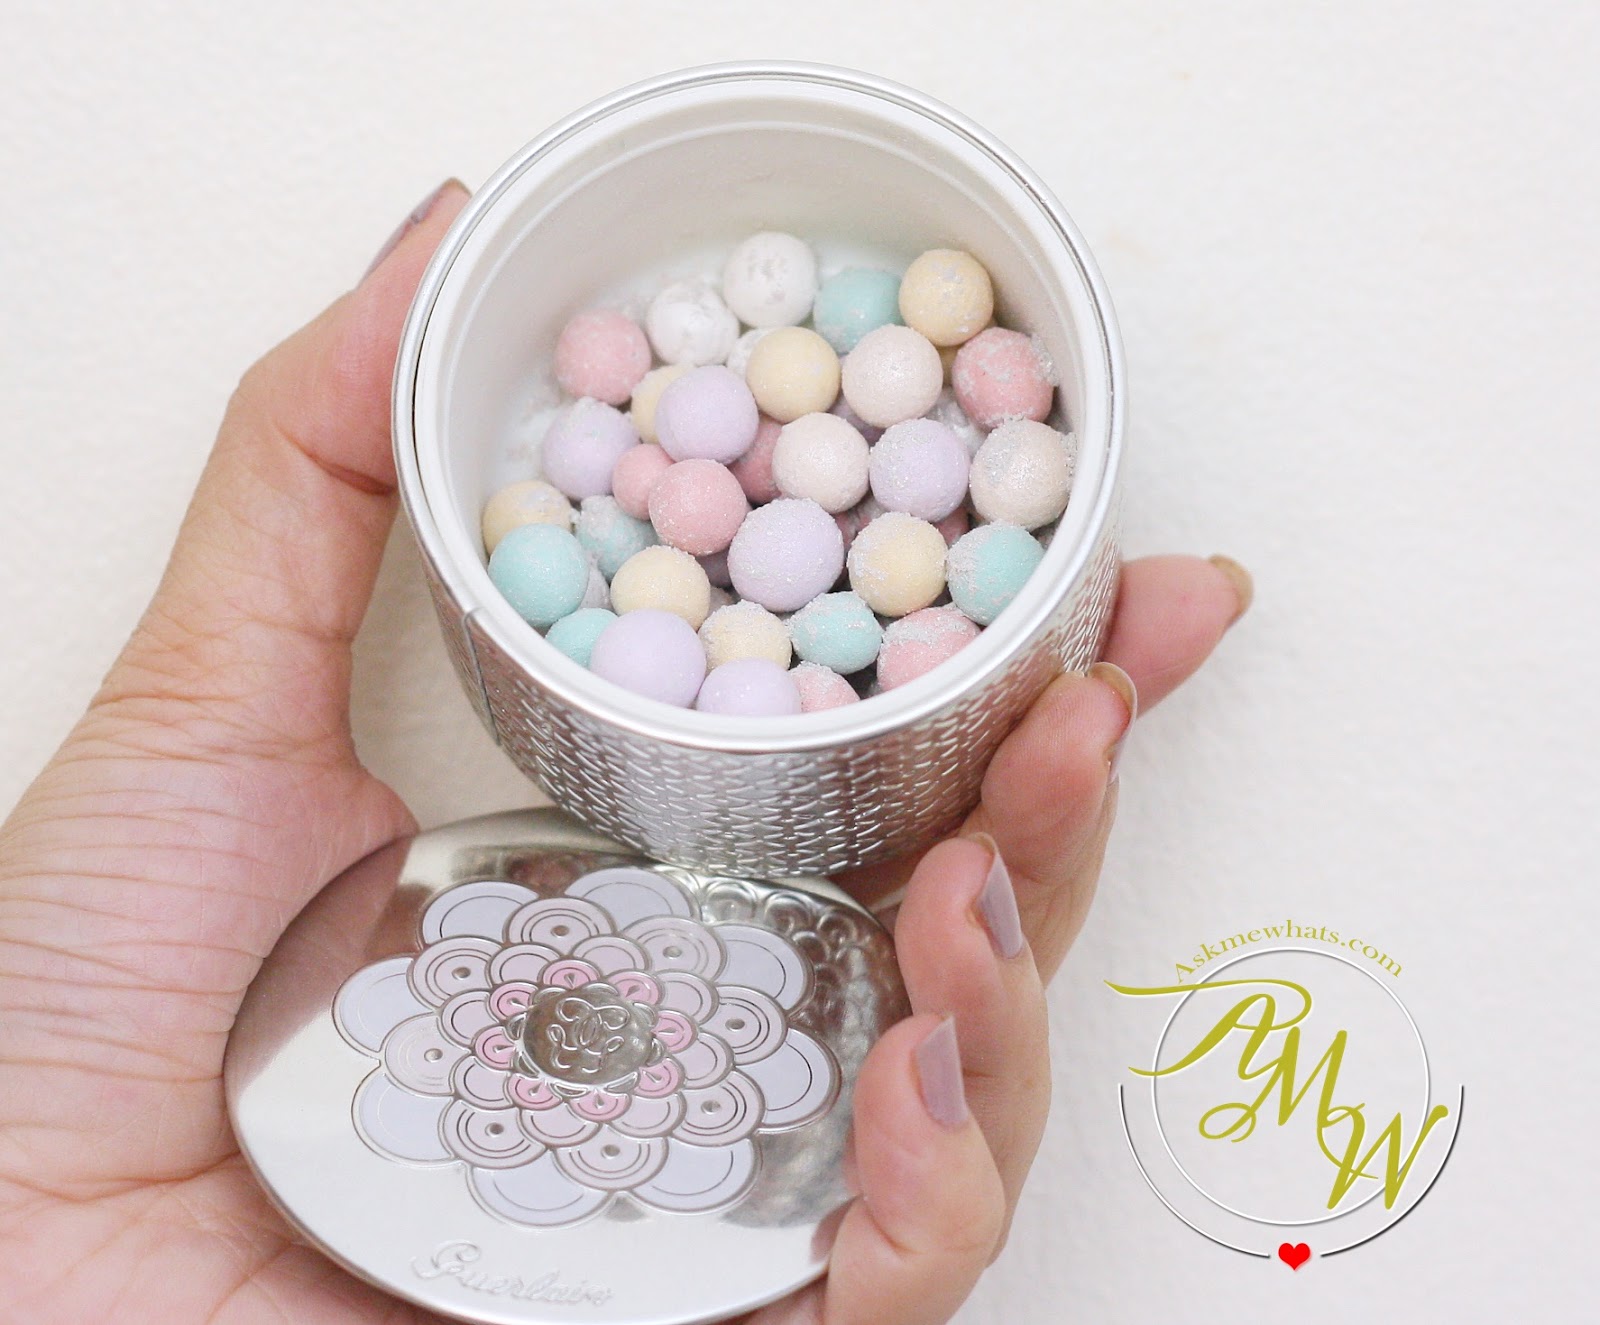 Powder Review Askmewhats: Pearls Light Revealing Of Guerlain Meteorites -